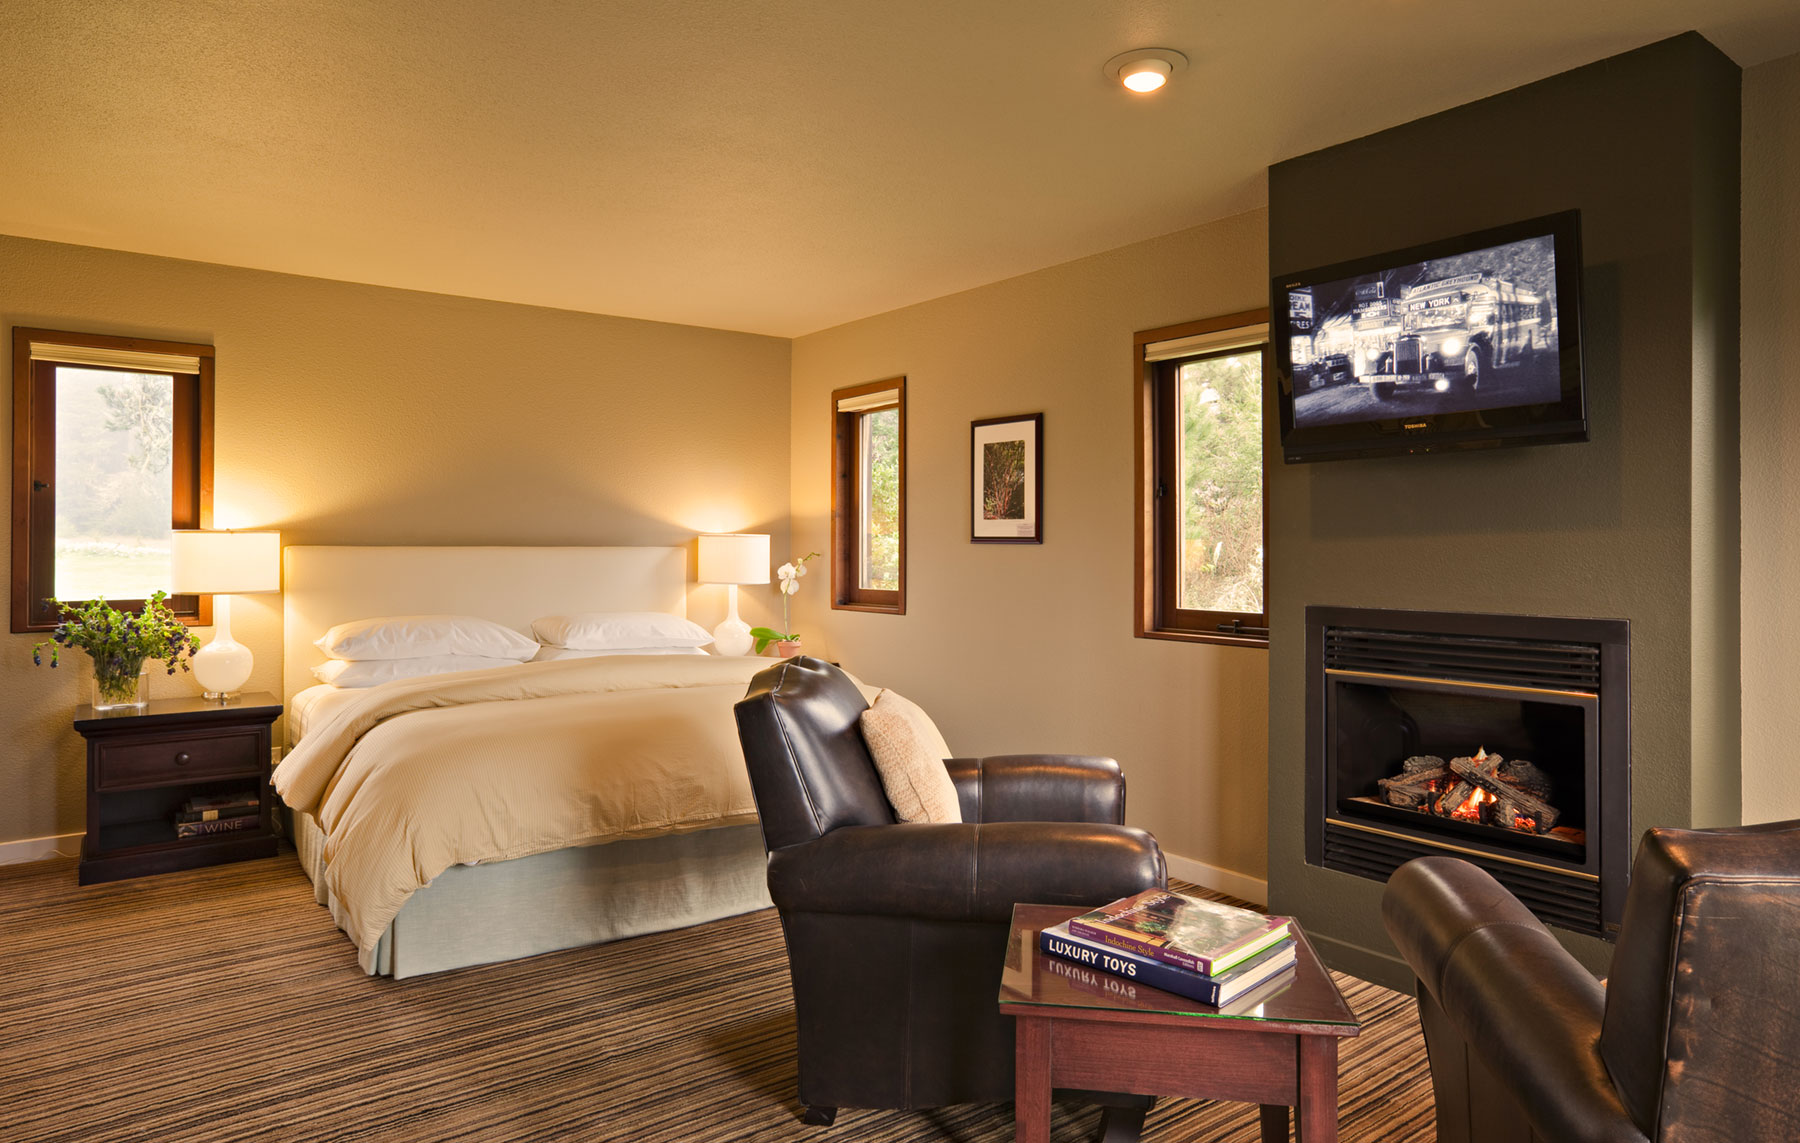 The Manzanita Room with King bed, flat screen TV, and leather armchairs around a fireplace